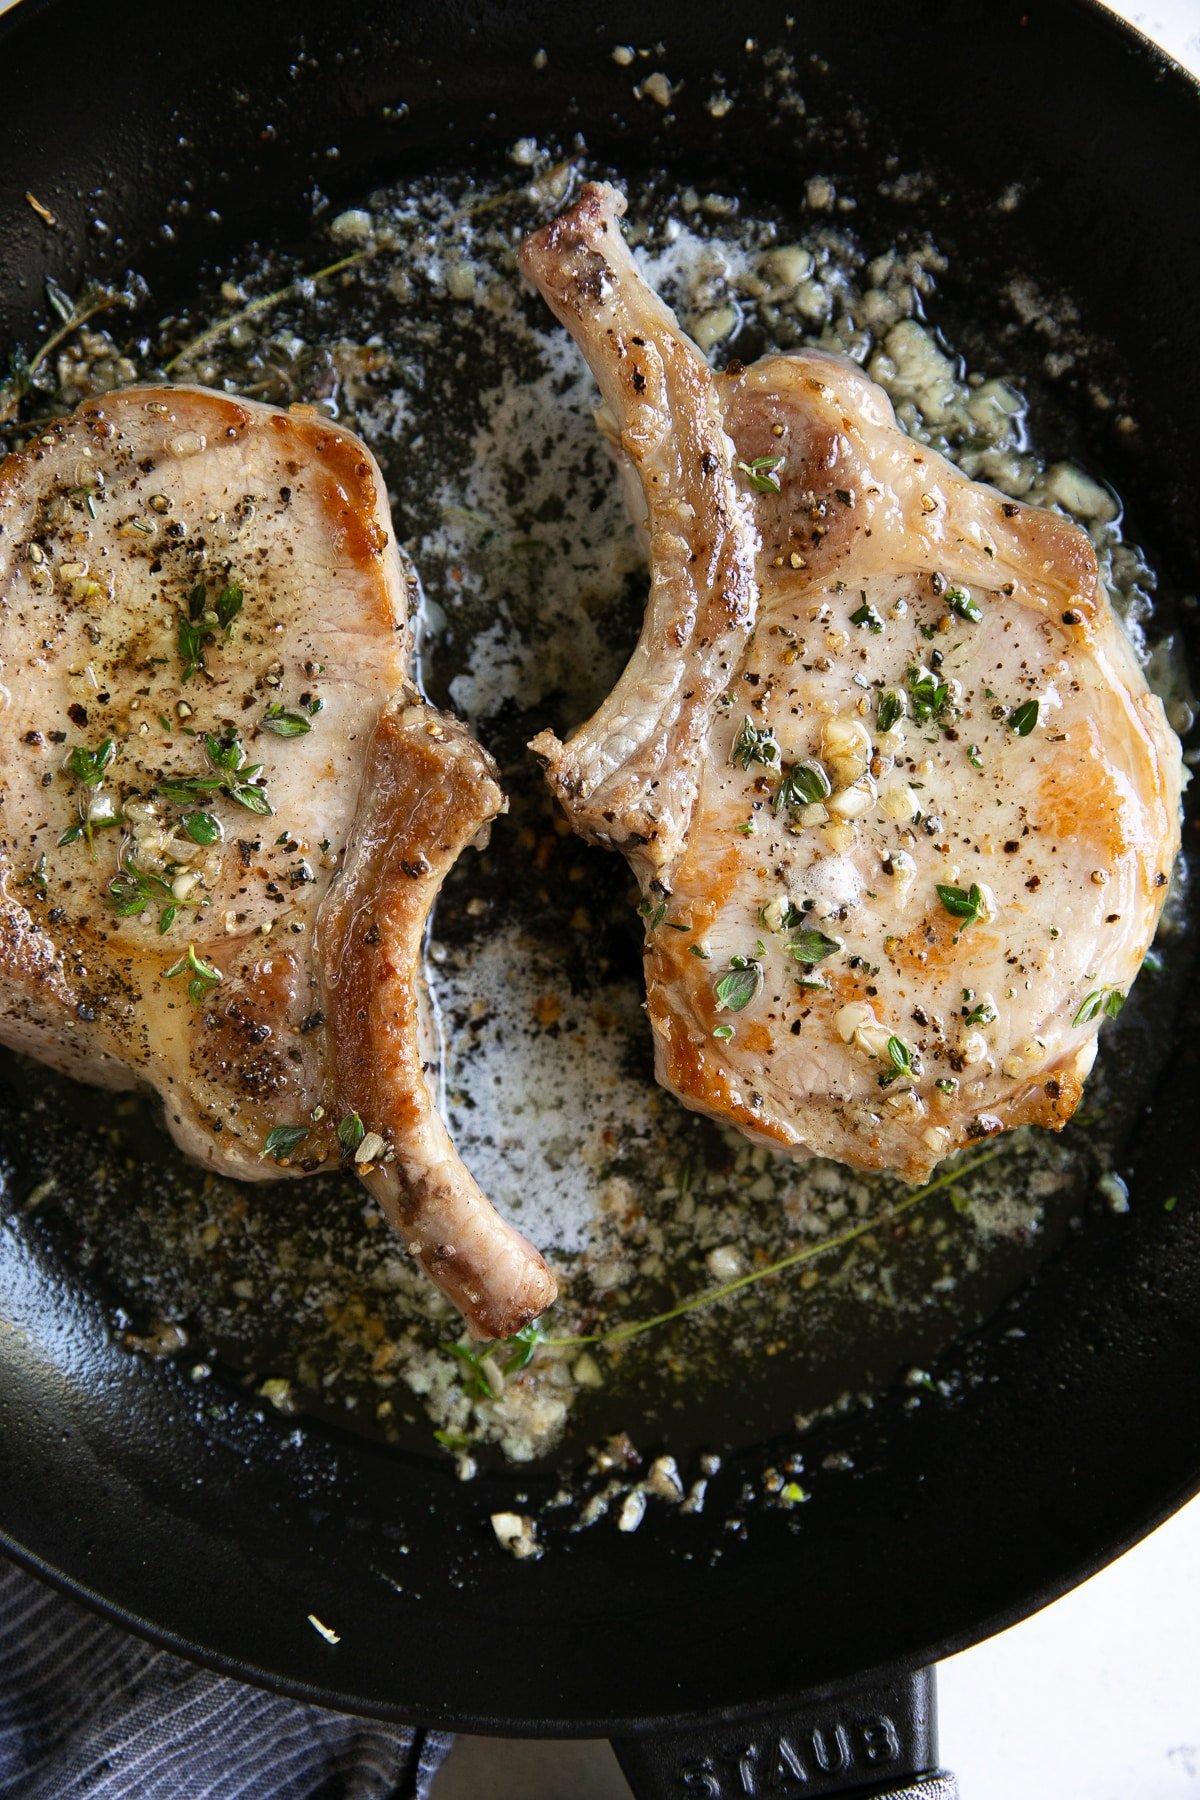 Garlic Butter Pork Chop Recipe Ready In Just 15 Minutes The Forked Spoon,Spicy Chinese Eggplant Recipe